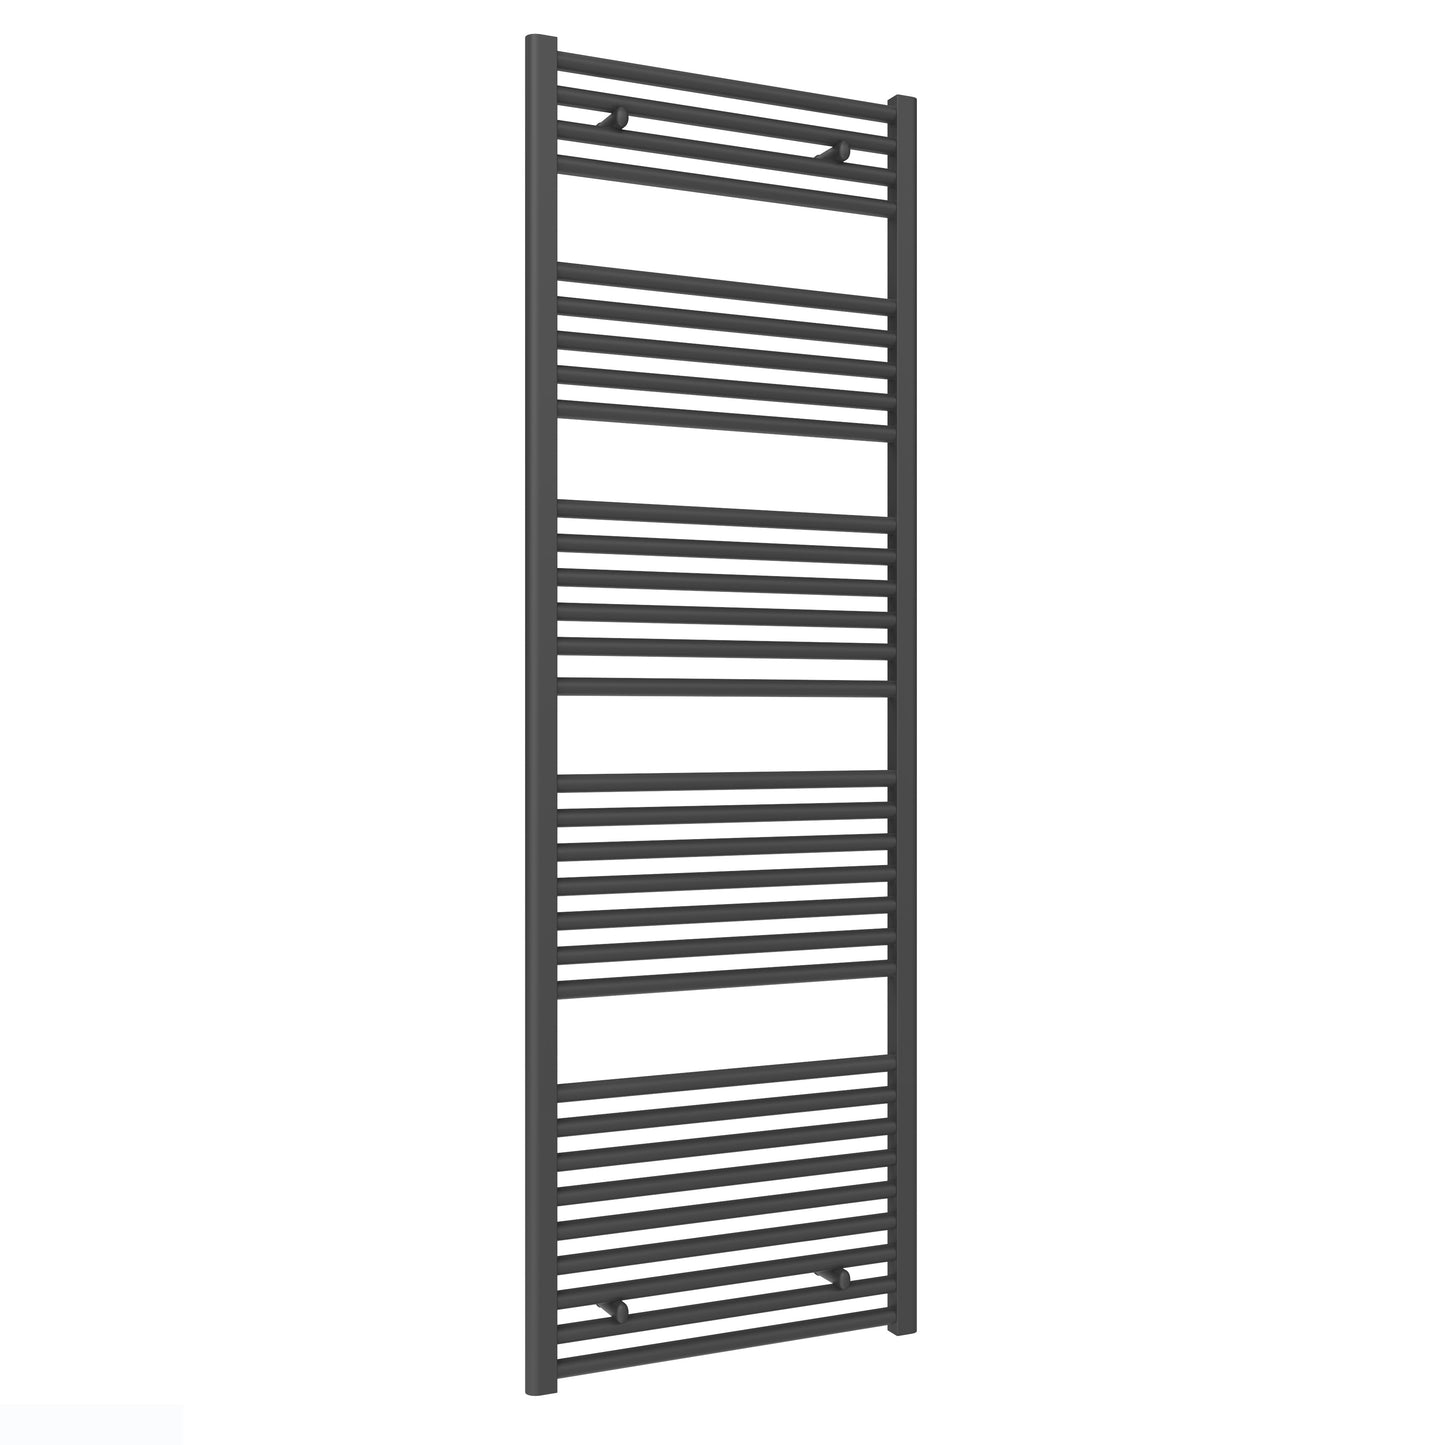 Diva Dual Fuel Heated Towel Rail -Various Sizes - Anthracite